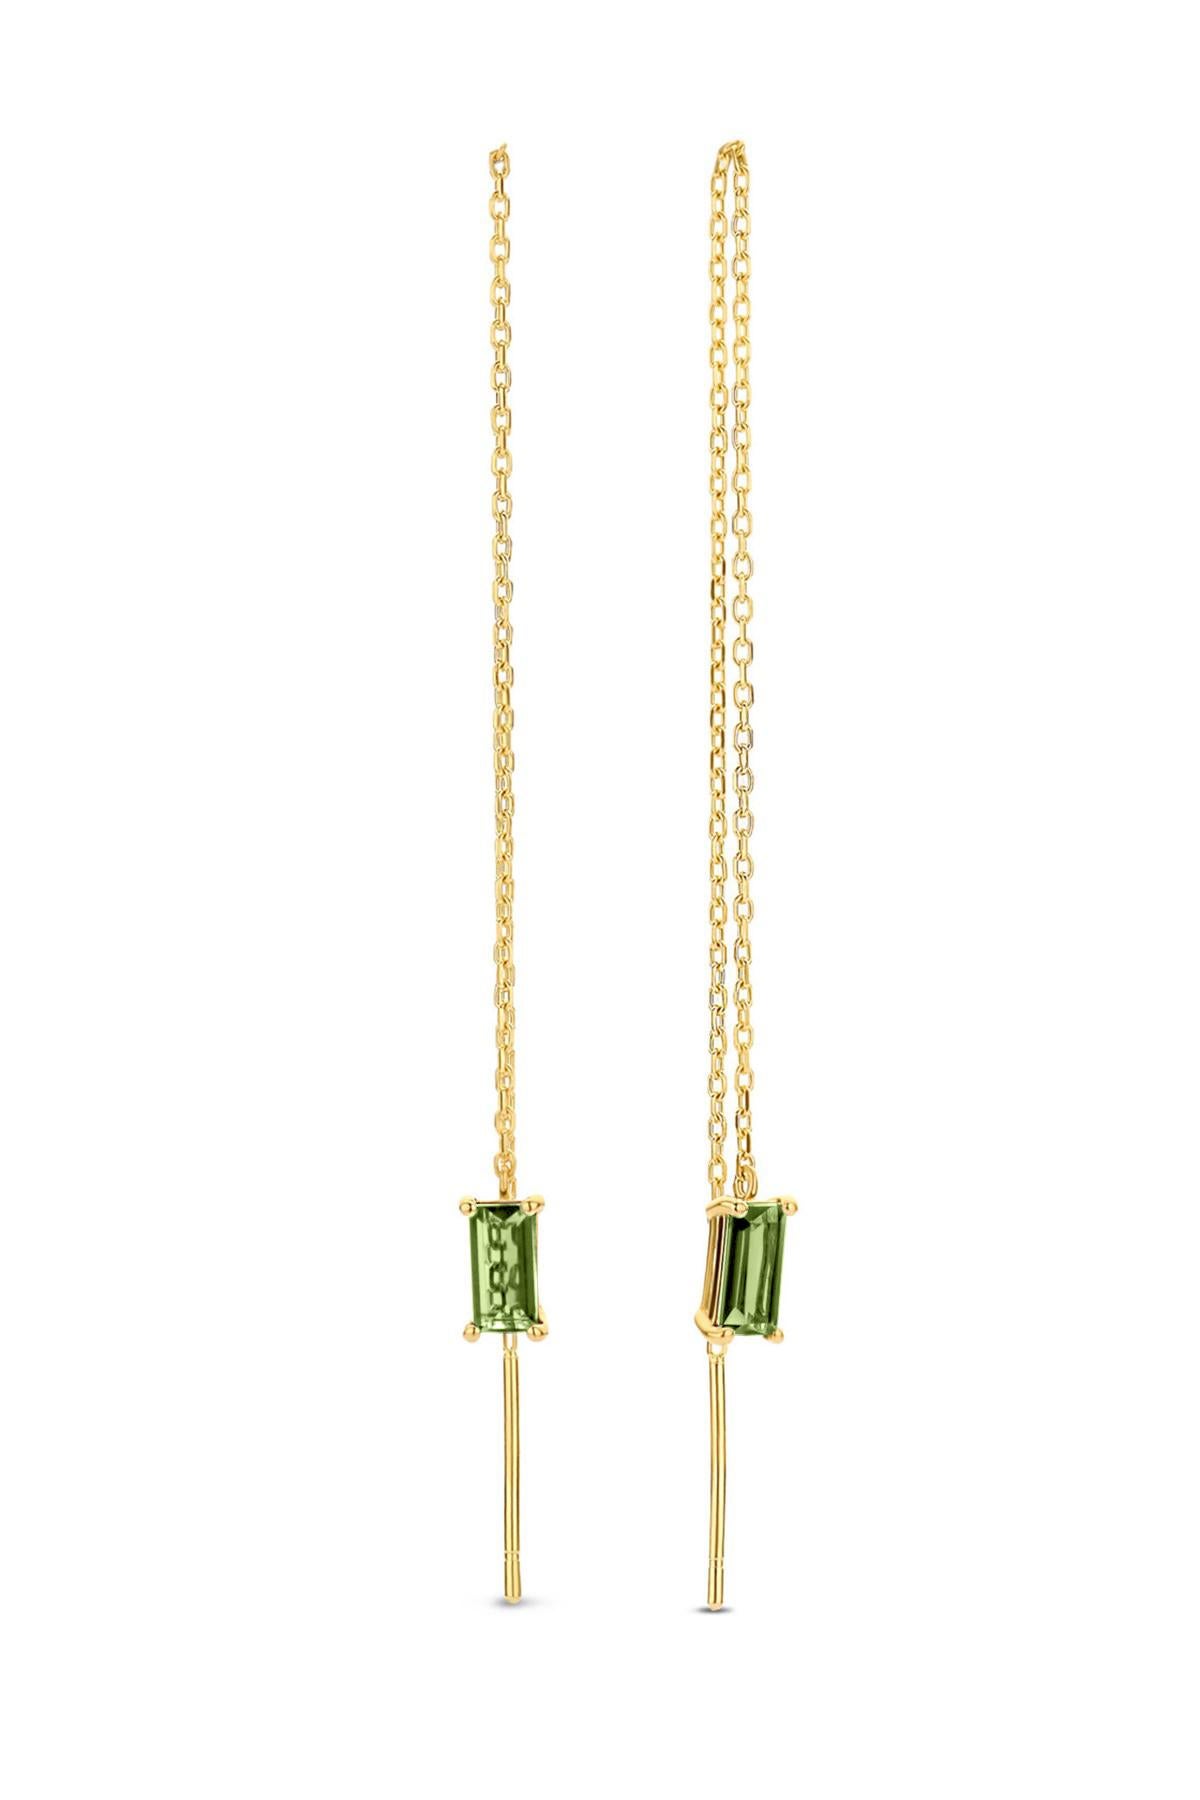 Modern 14k solid gold drop earrings with peridots.  For Sale